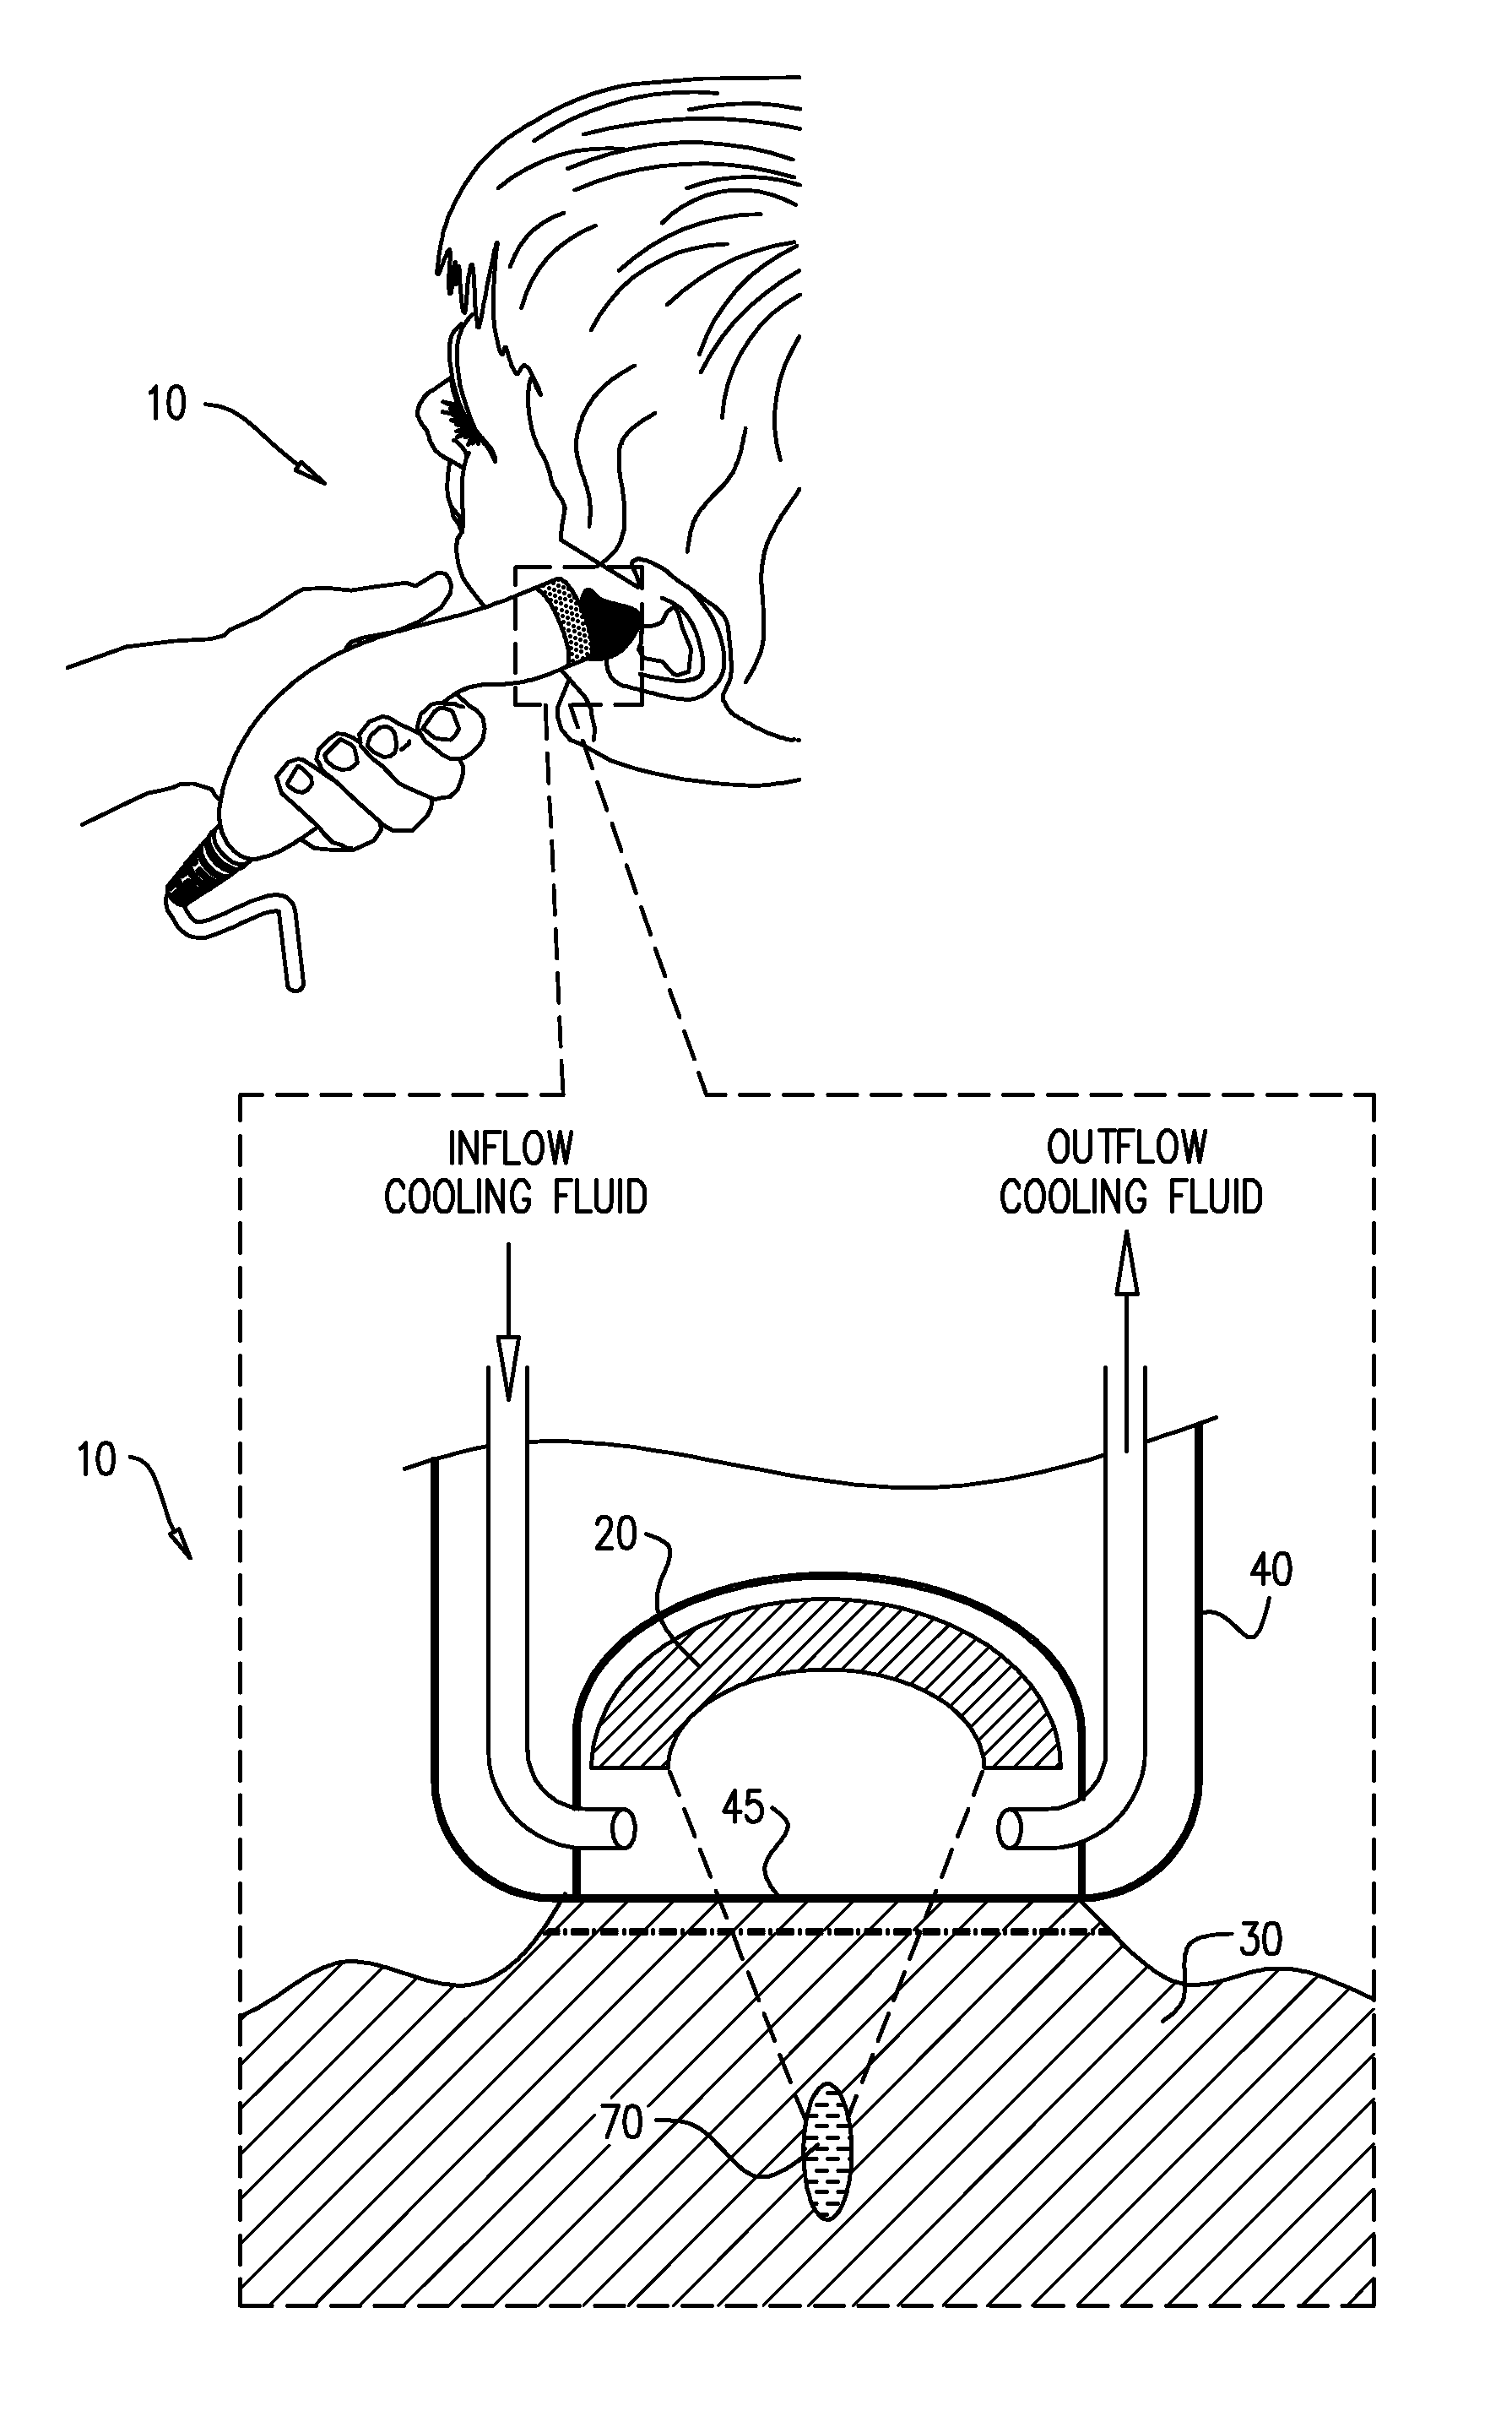 Method and device for treatment of keloids and hypertrophic scars using focused ultrasound